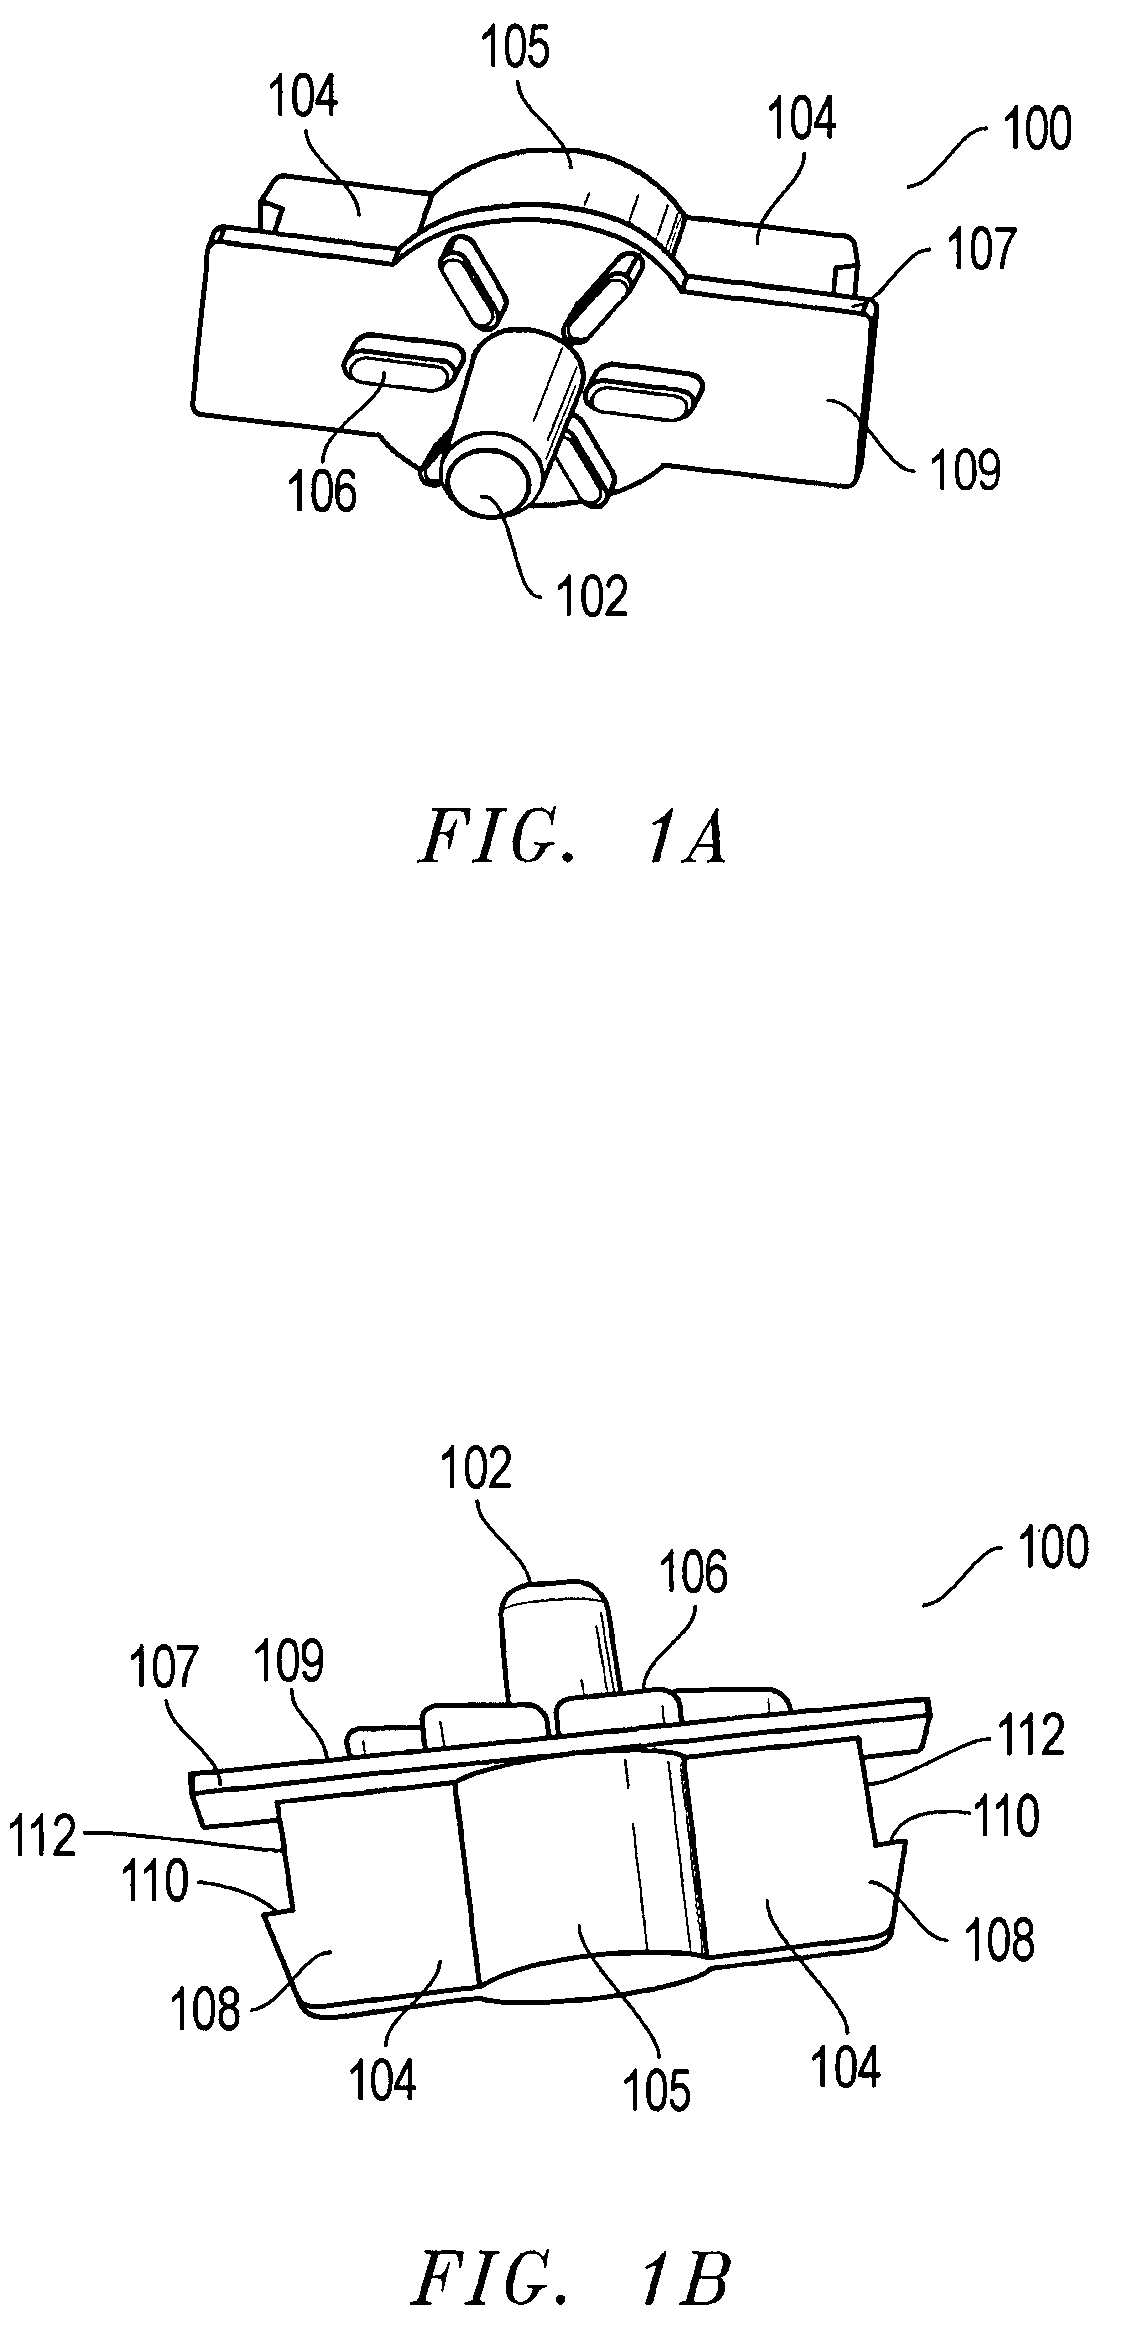 Systems and methods for mounting components of an information handling system